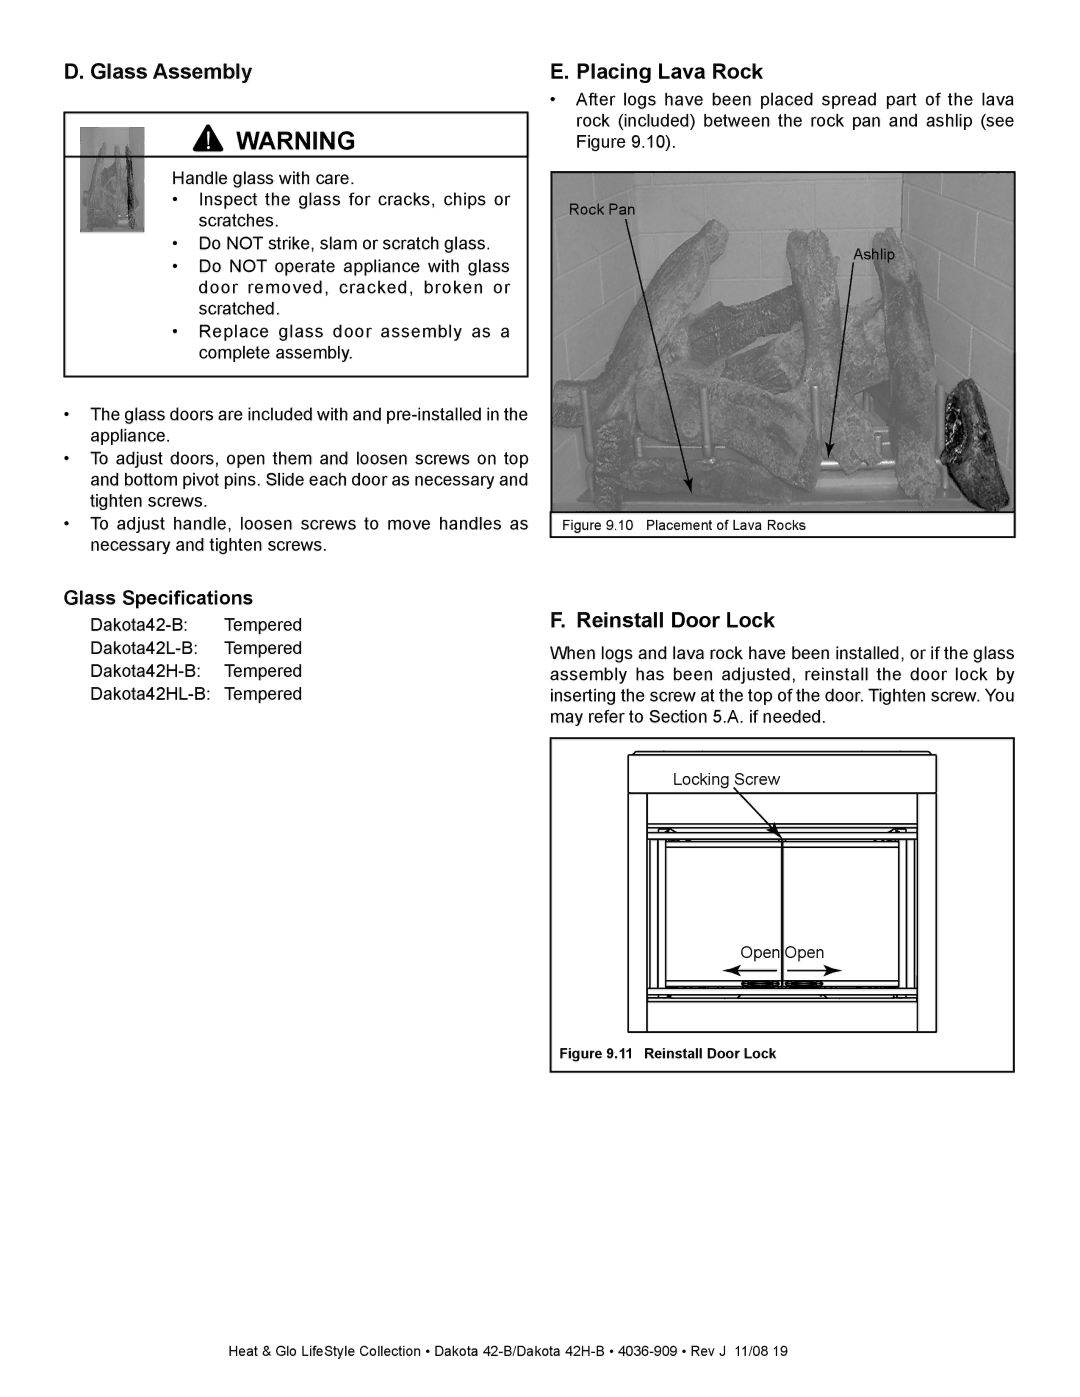 Hearth and Home Technologies 42-B, 42H-B owner manual Glass Assembly, Placing Lava Rock, Reinstall Door Lock 